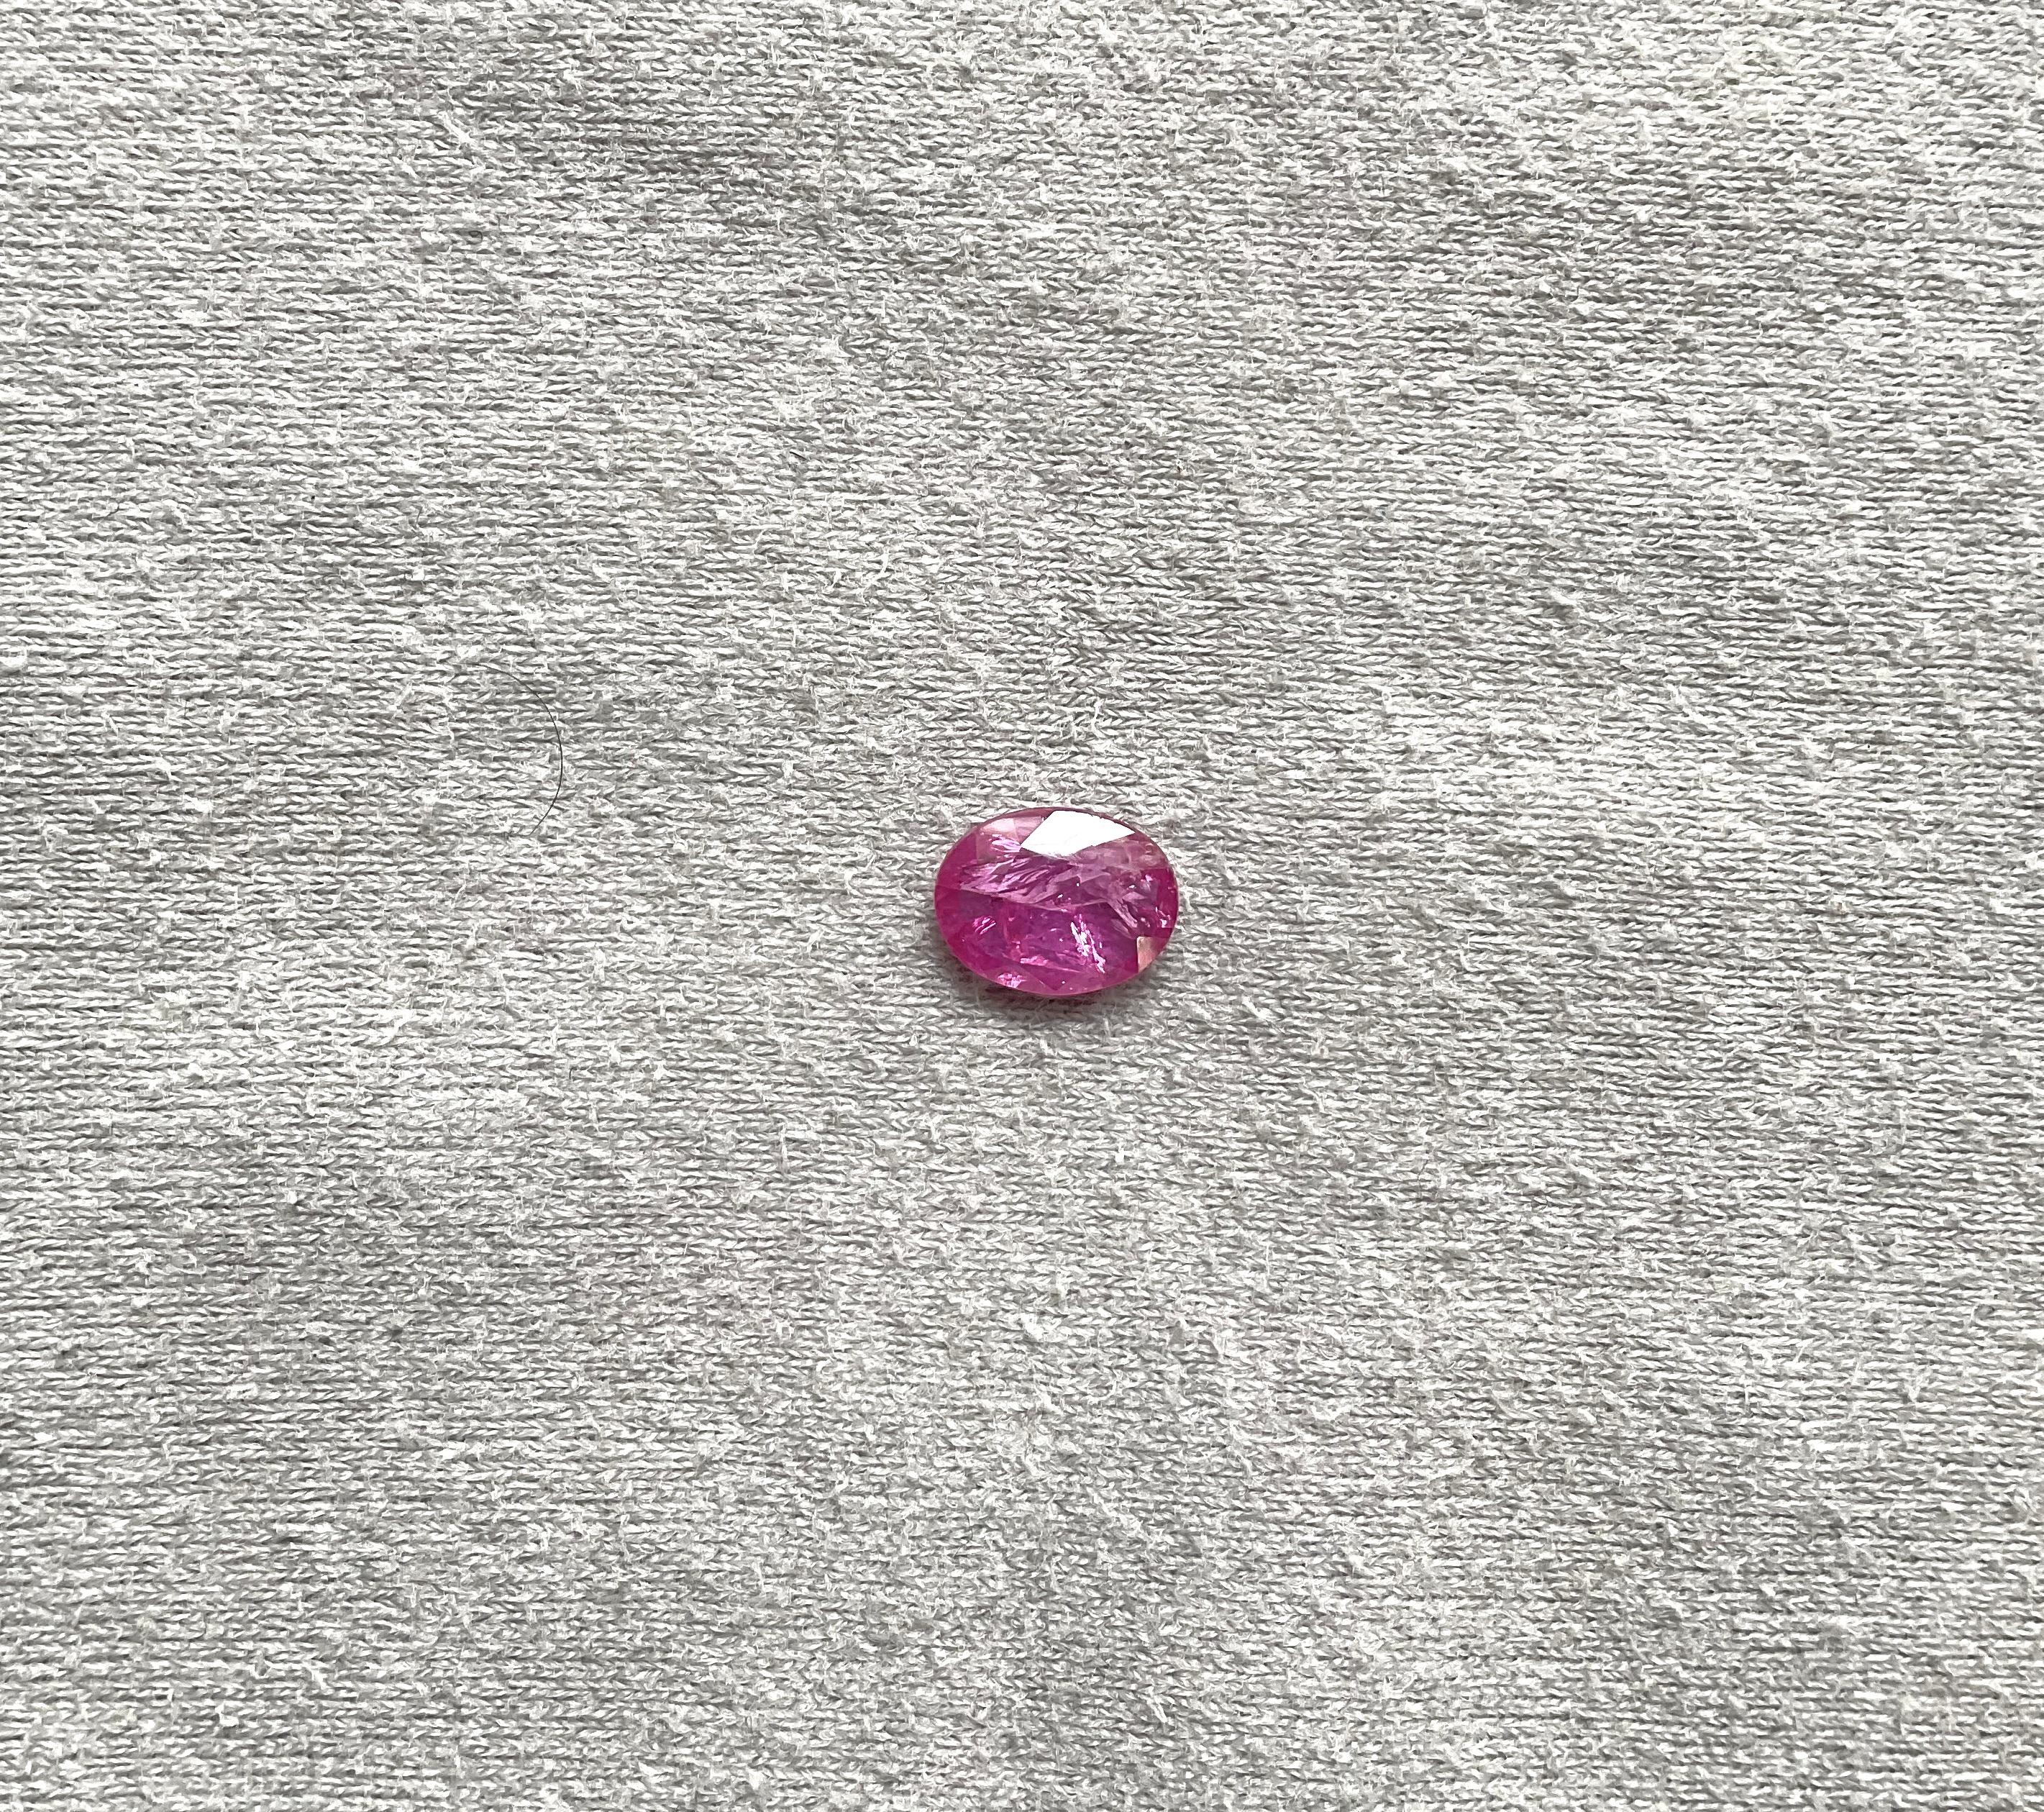 Art Deco Certified 2.41 Carats Mozambique Ruby Oval Faceted Cutstone No Heat Natural Gem For Sale